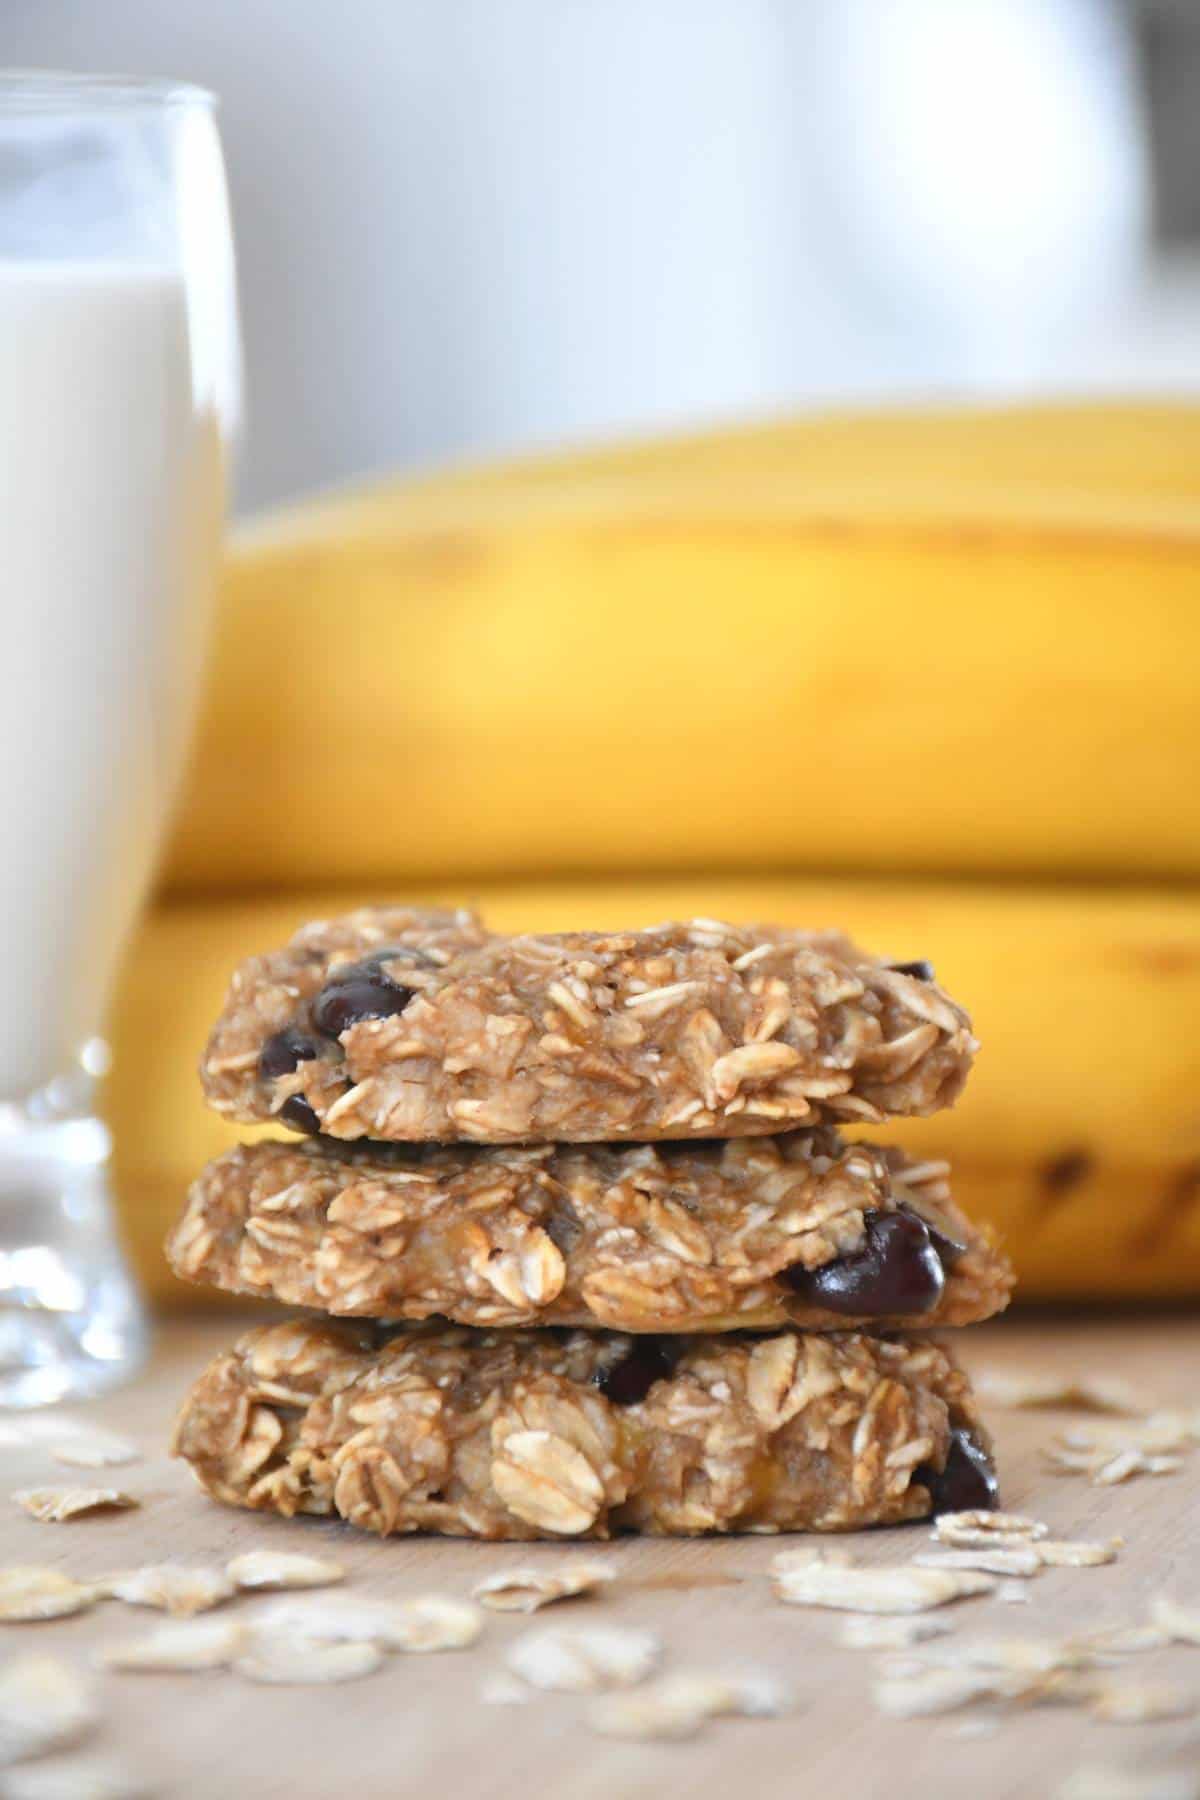 Chewy banana oatmeal chocolate chip cookies with a glass of vegetal beverage.